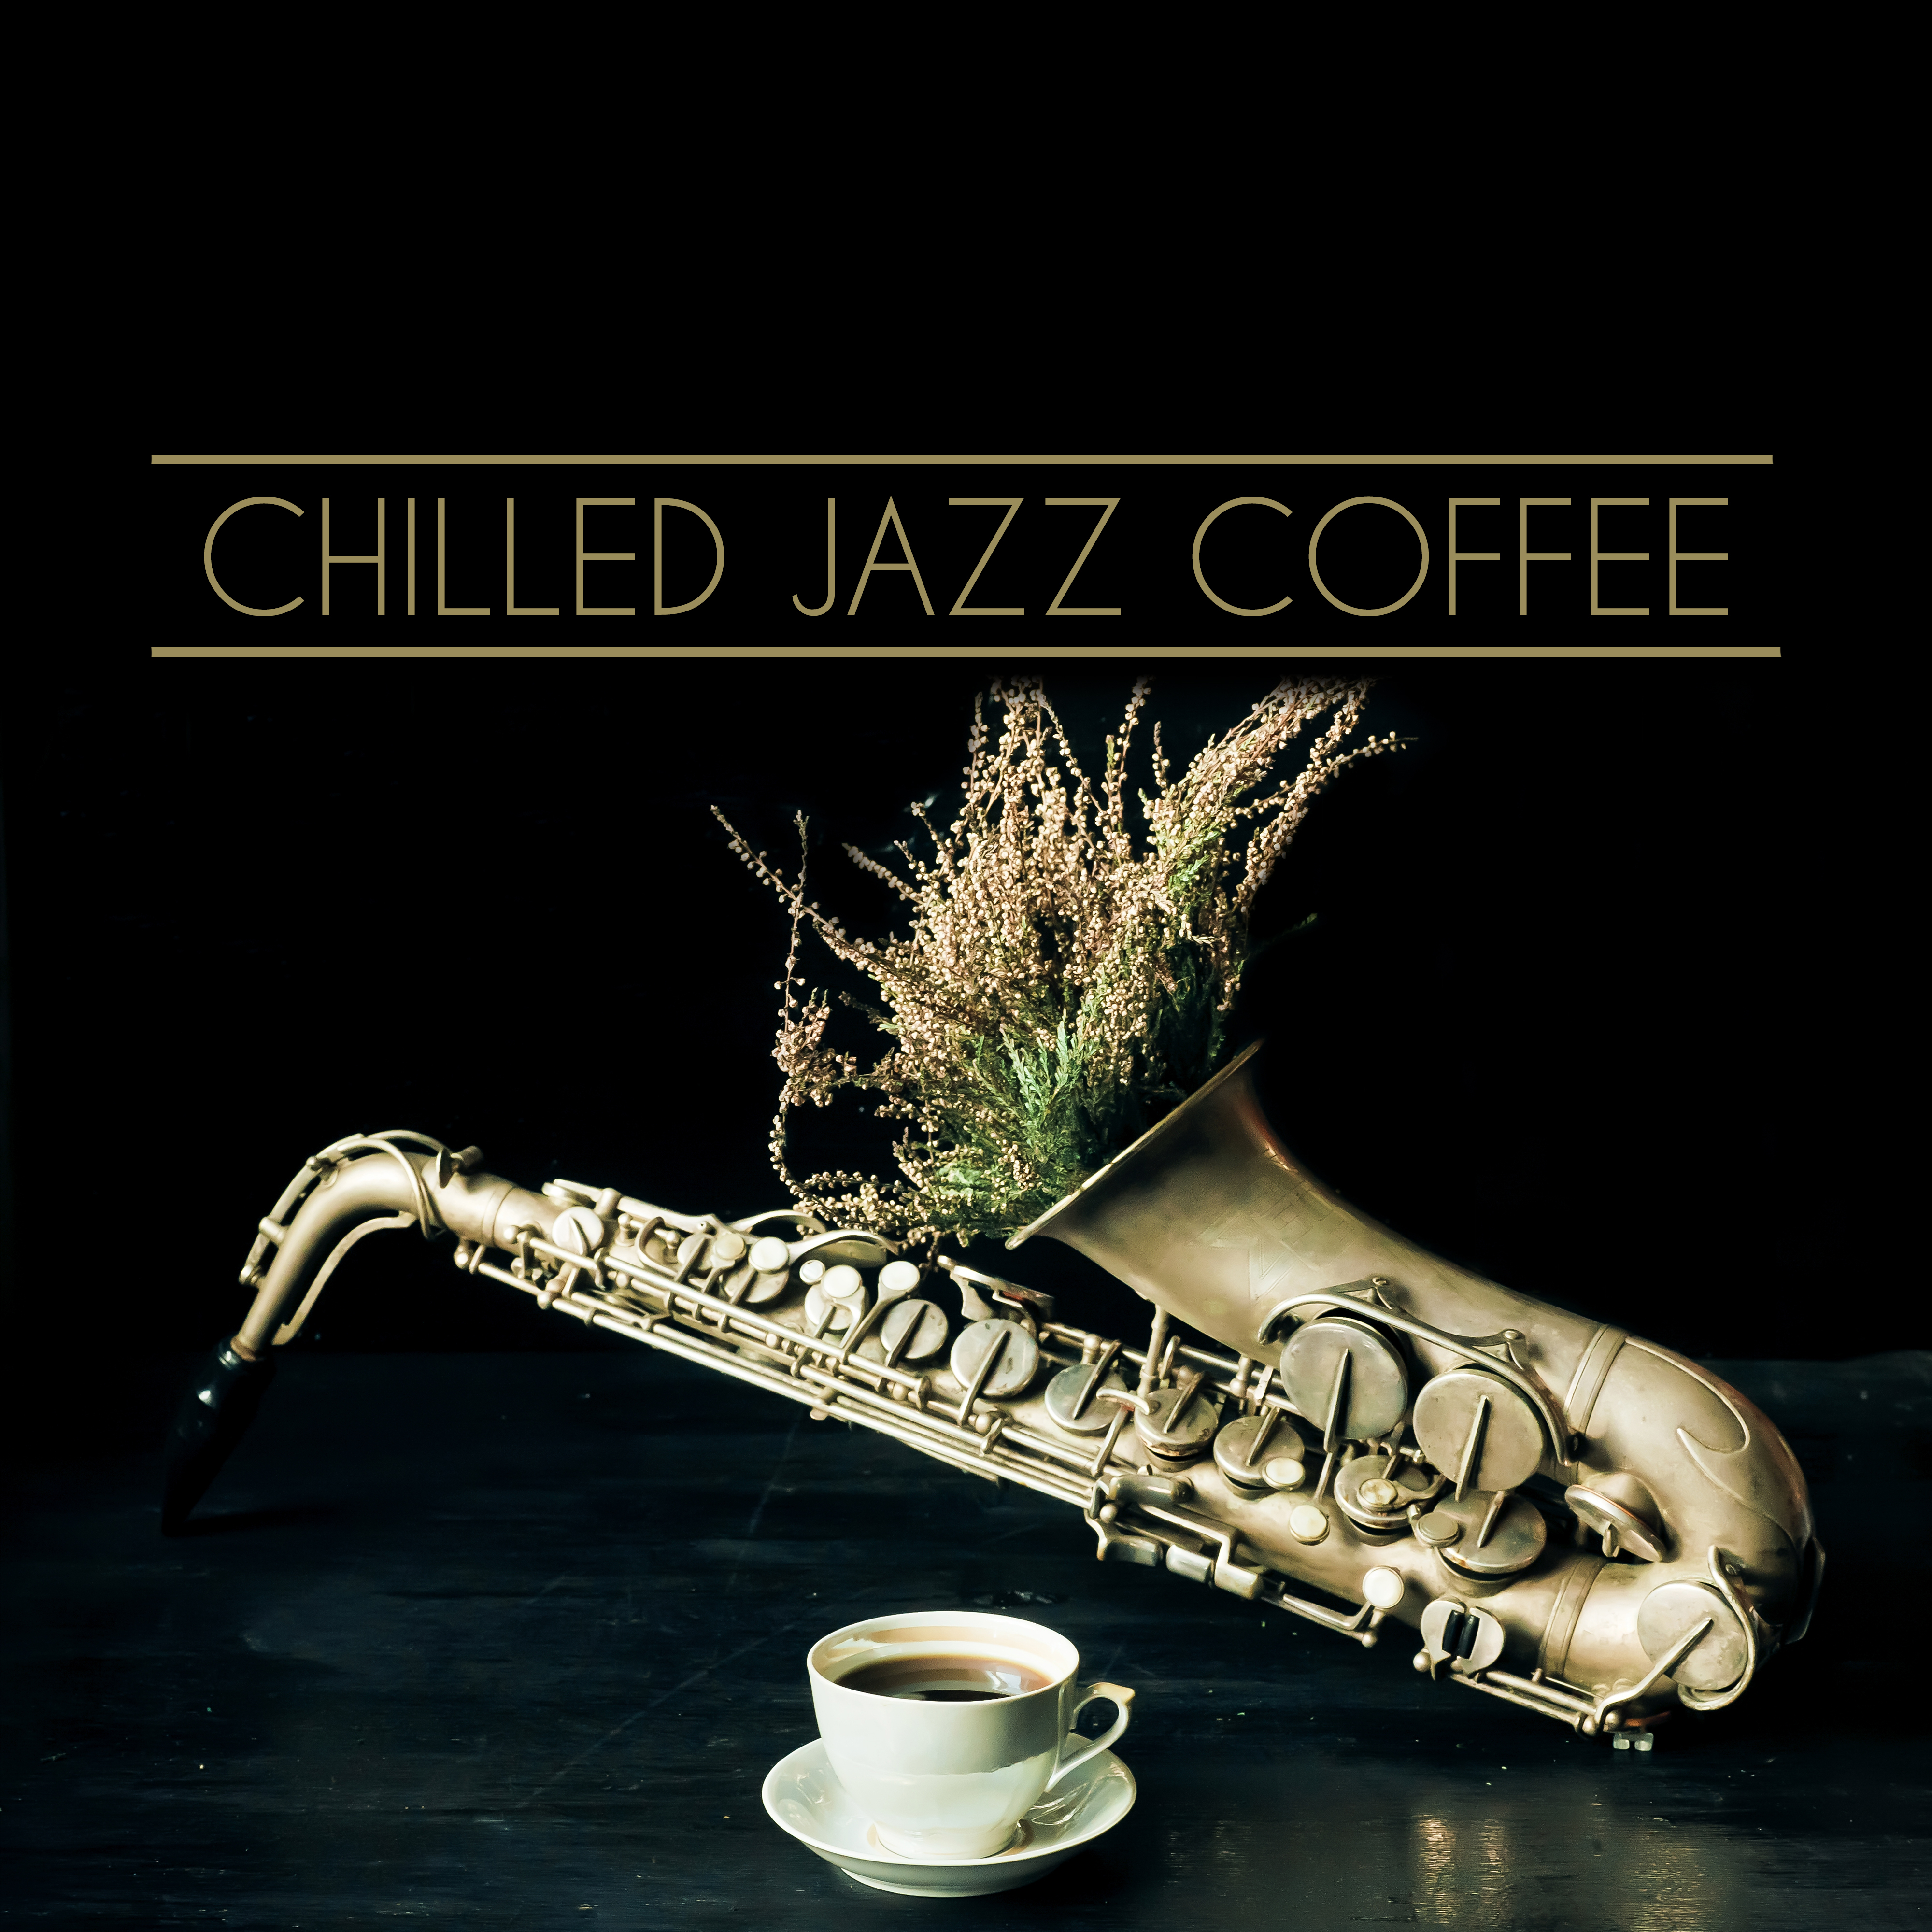 Chilled Jazz Coffee